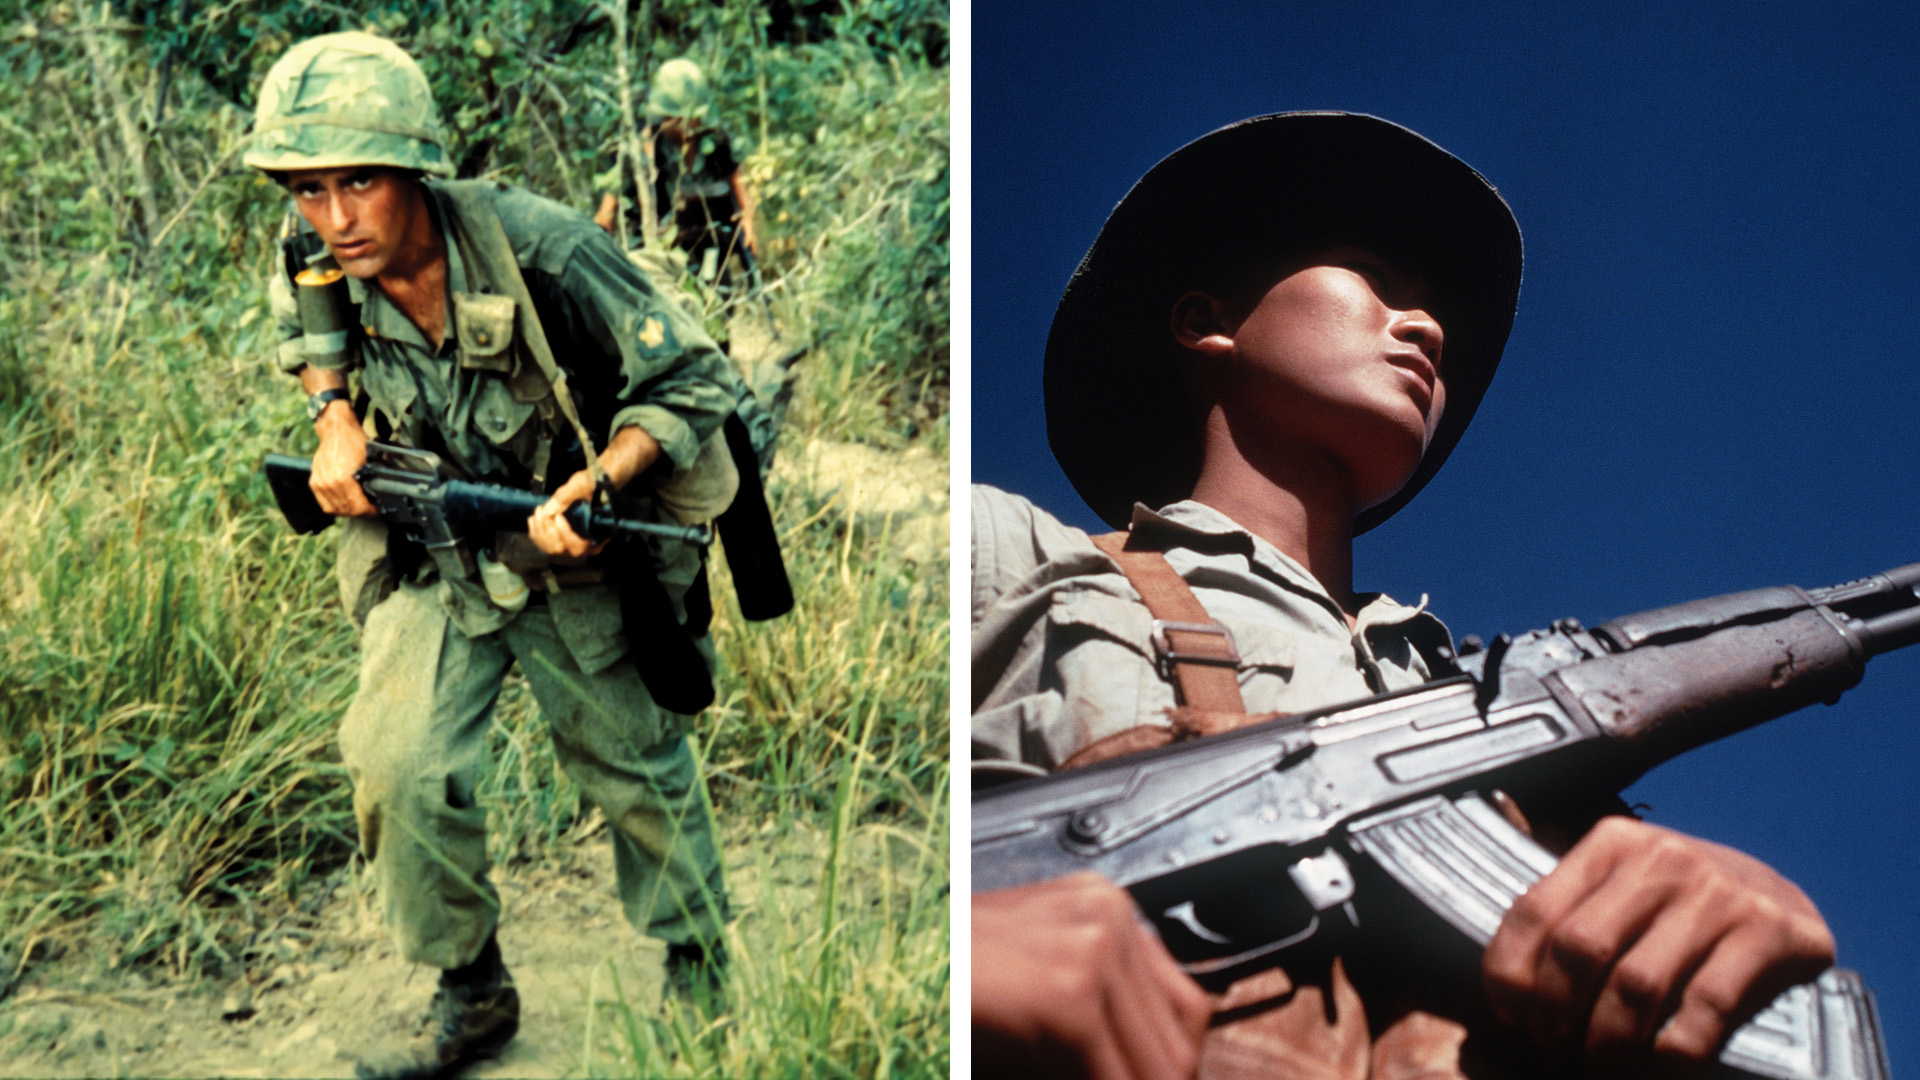 The AK-47 vs. the M16 Rifle During the Vietnam War